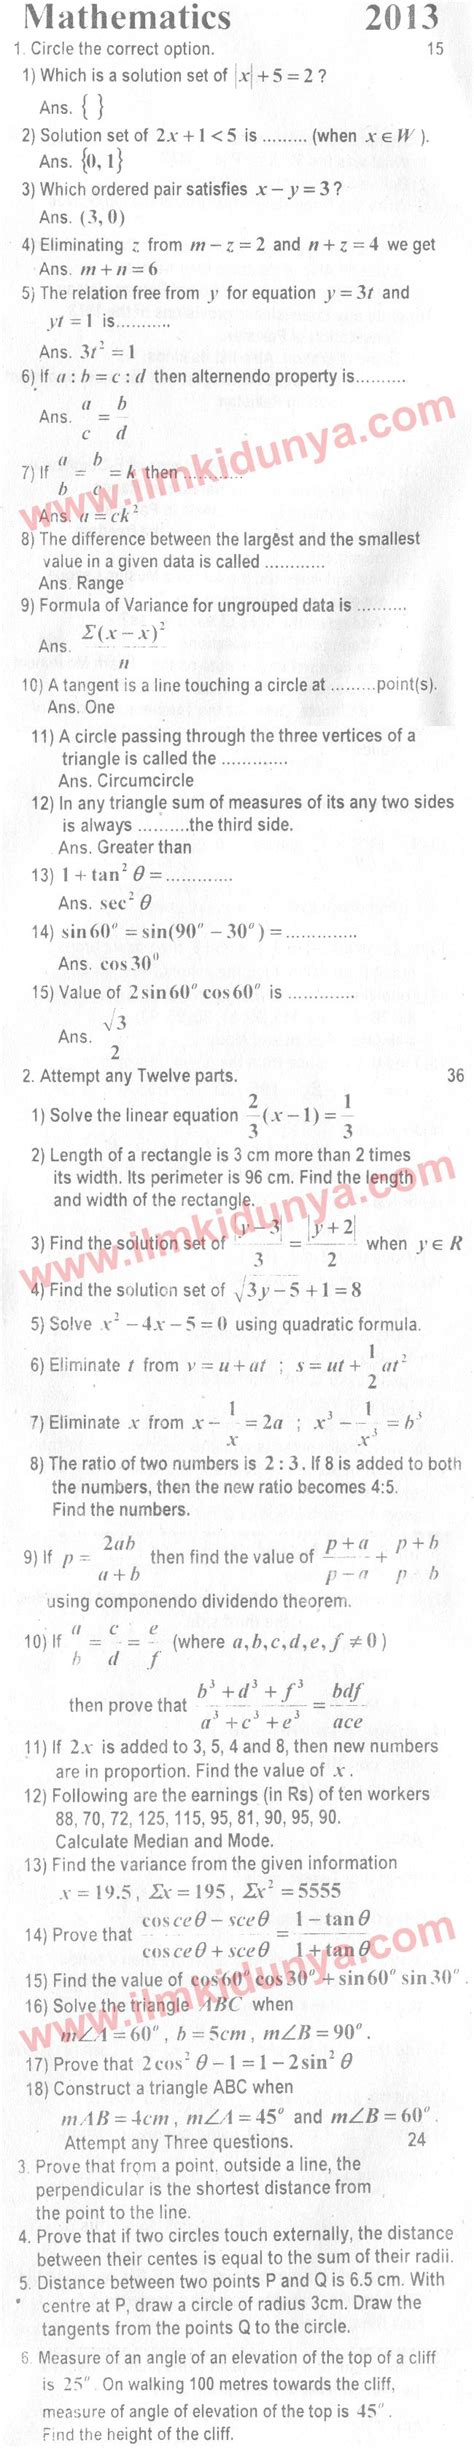 Read Matric Maths Past Papers 2013 